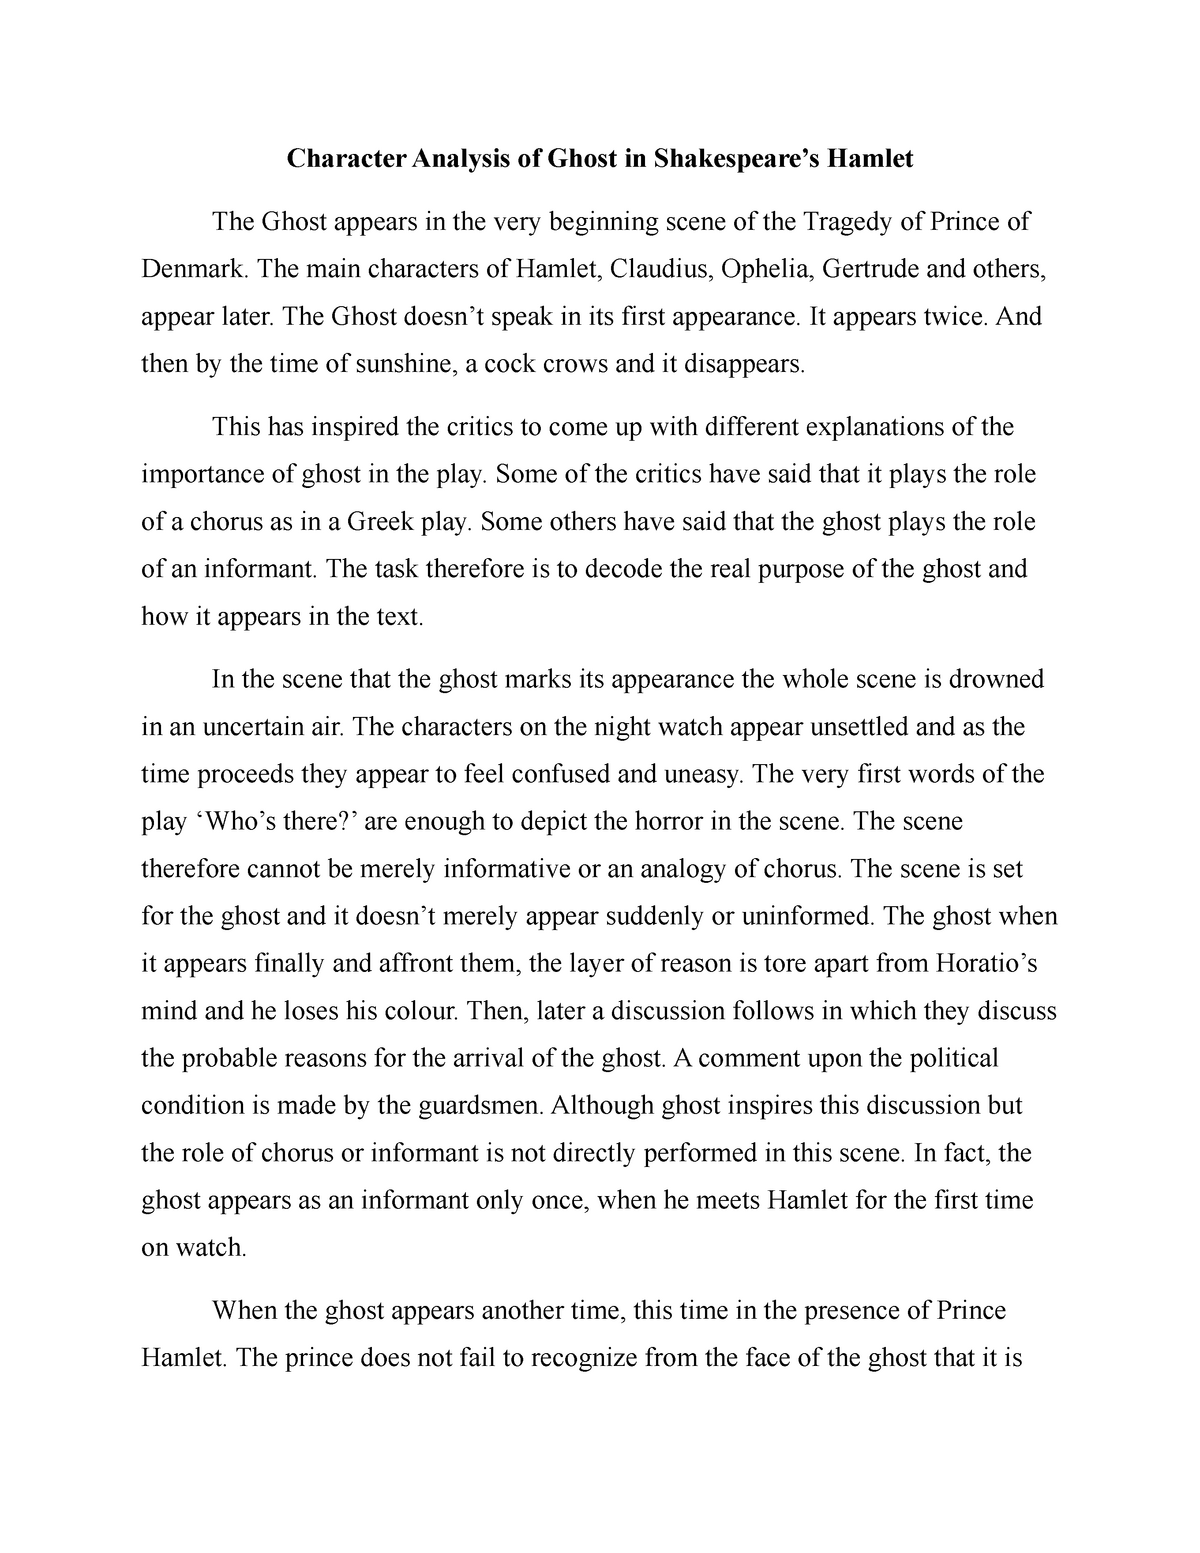 essay on the ghost in hamlet